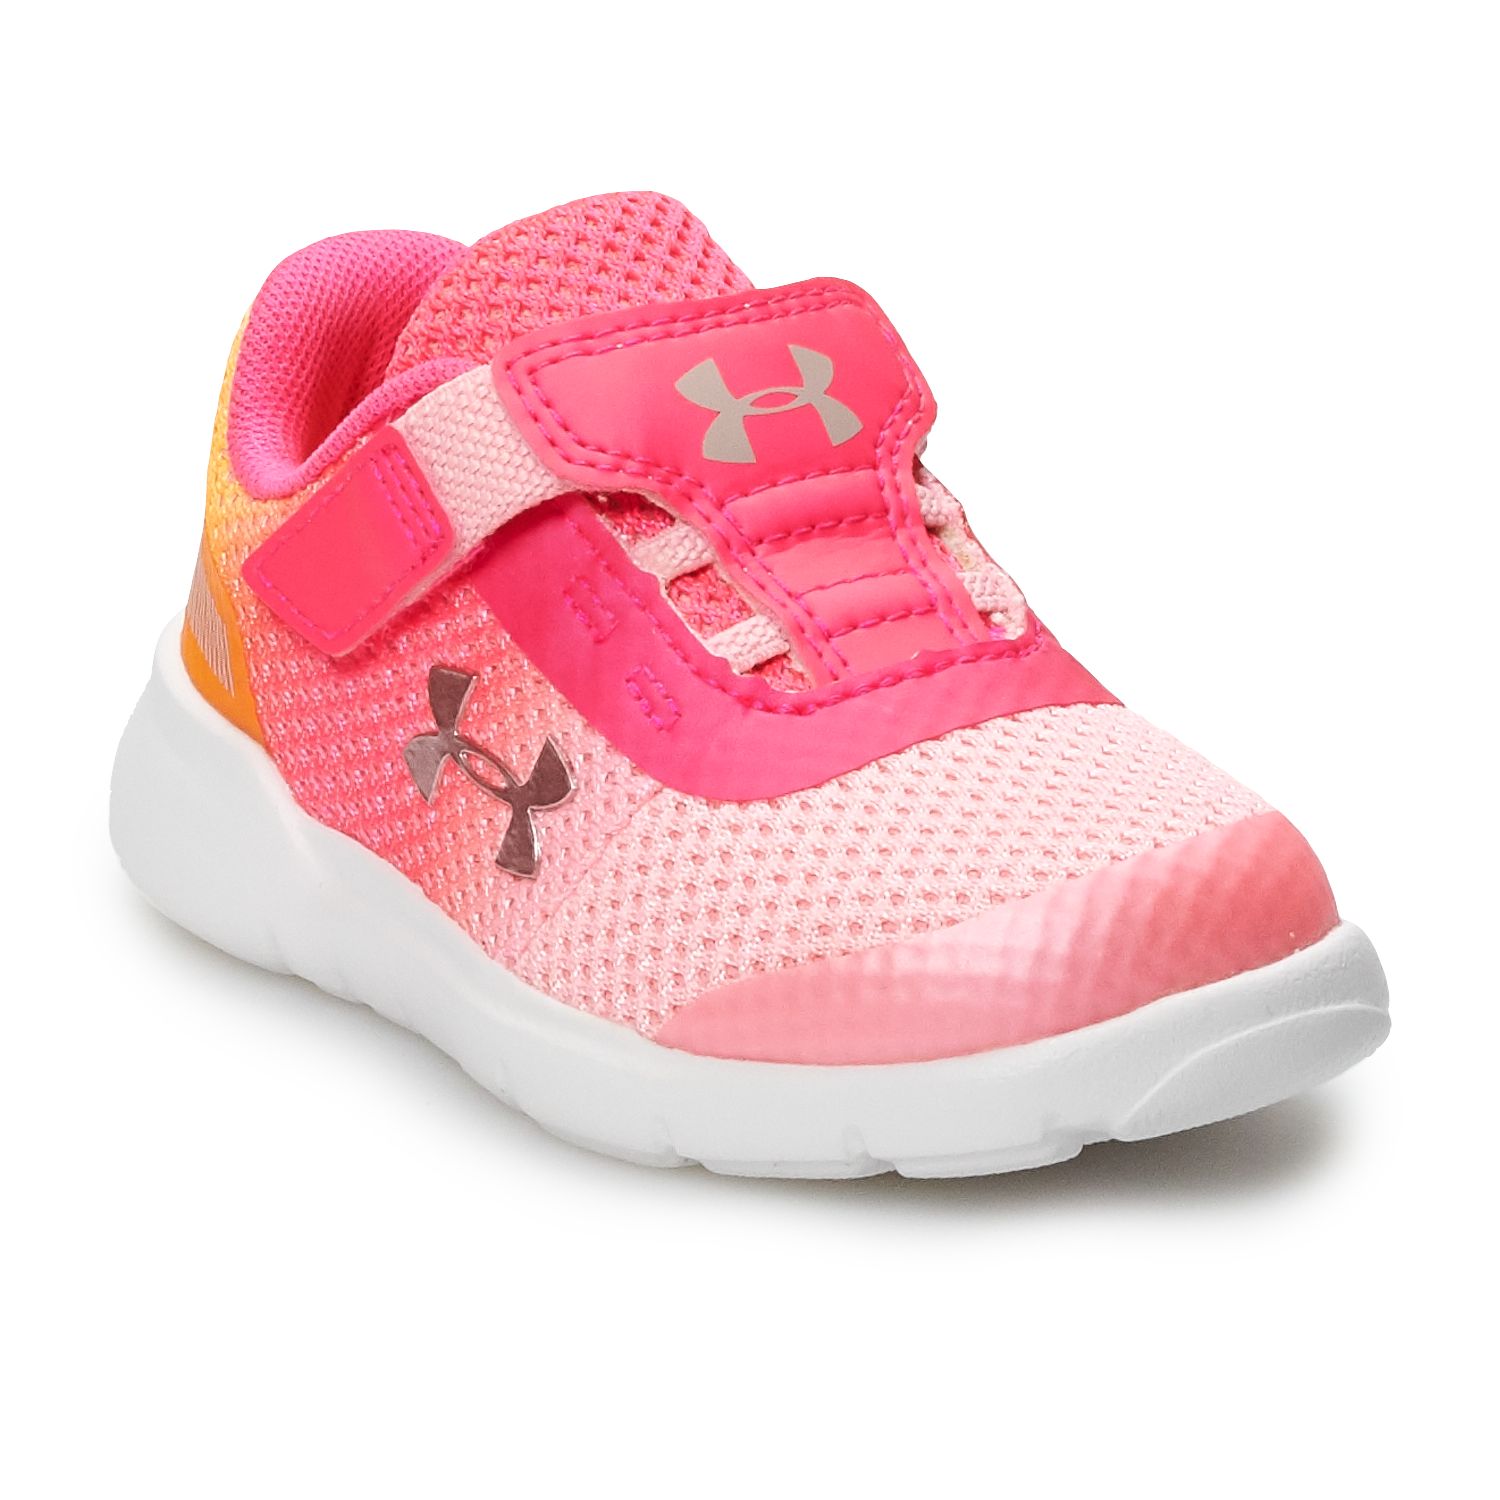 under armour shoes for toddlers